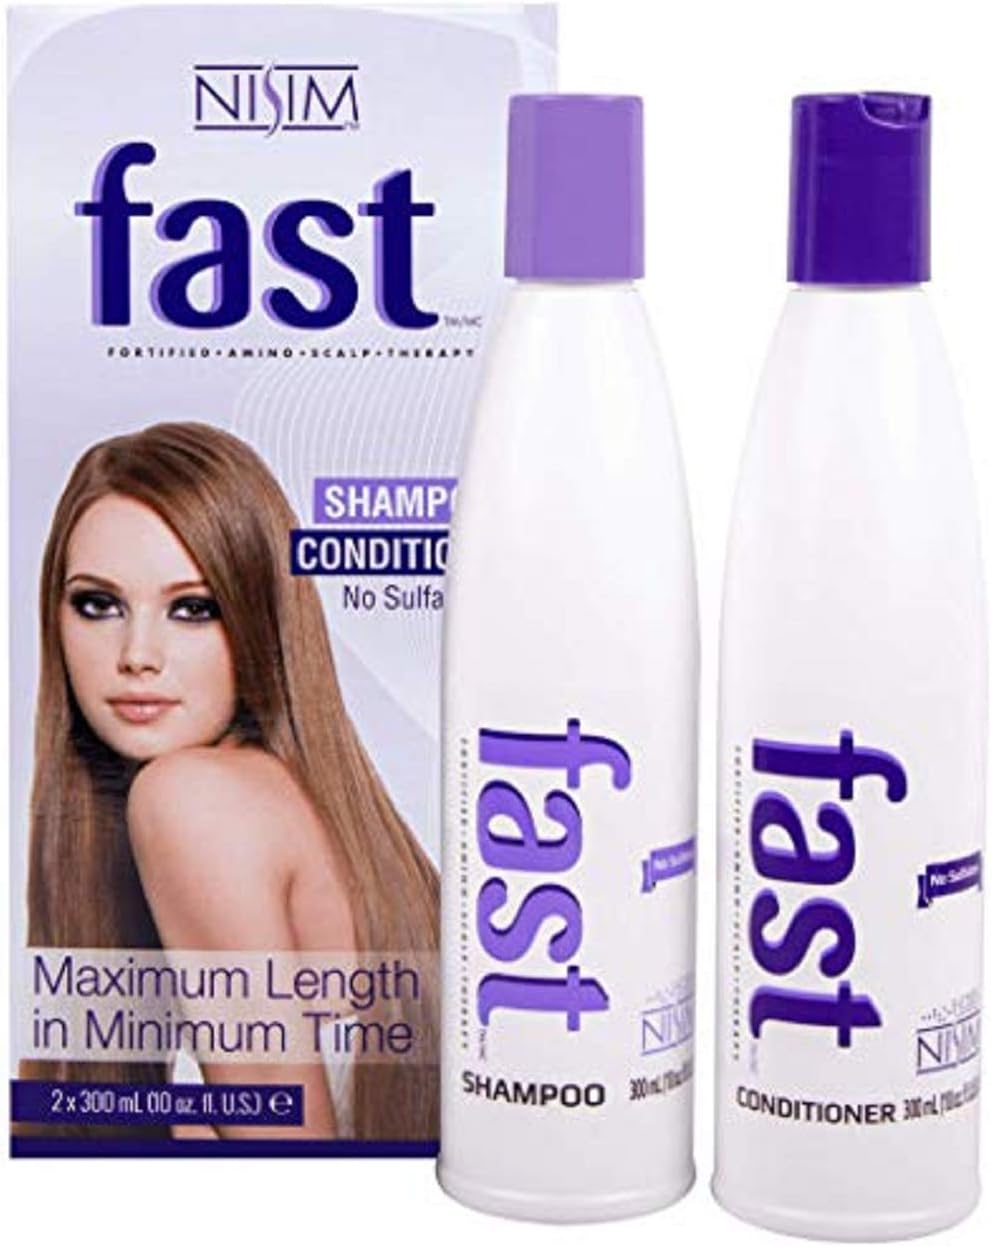 Buy FAST Hair Growth Shampoo and Conditioner Online at Lowest Price in Ubuy  Botswana. B00C2SD2SA